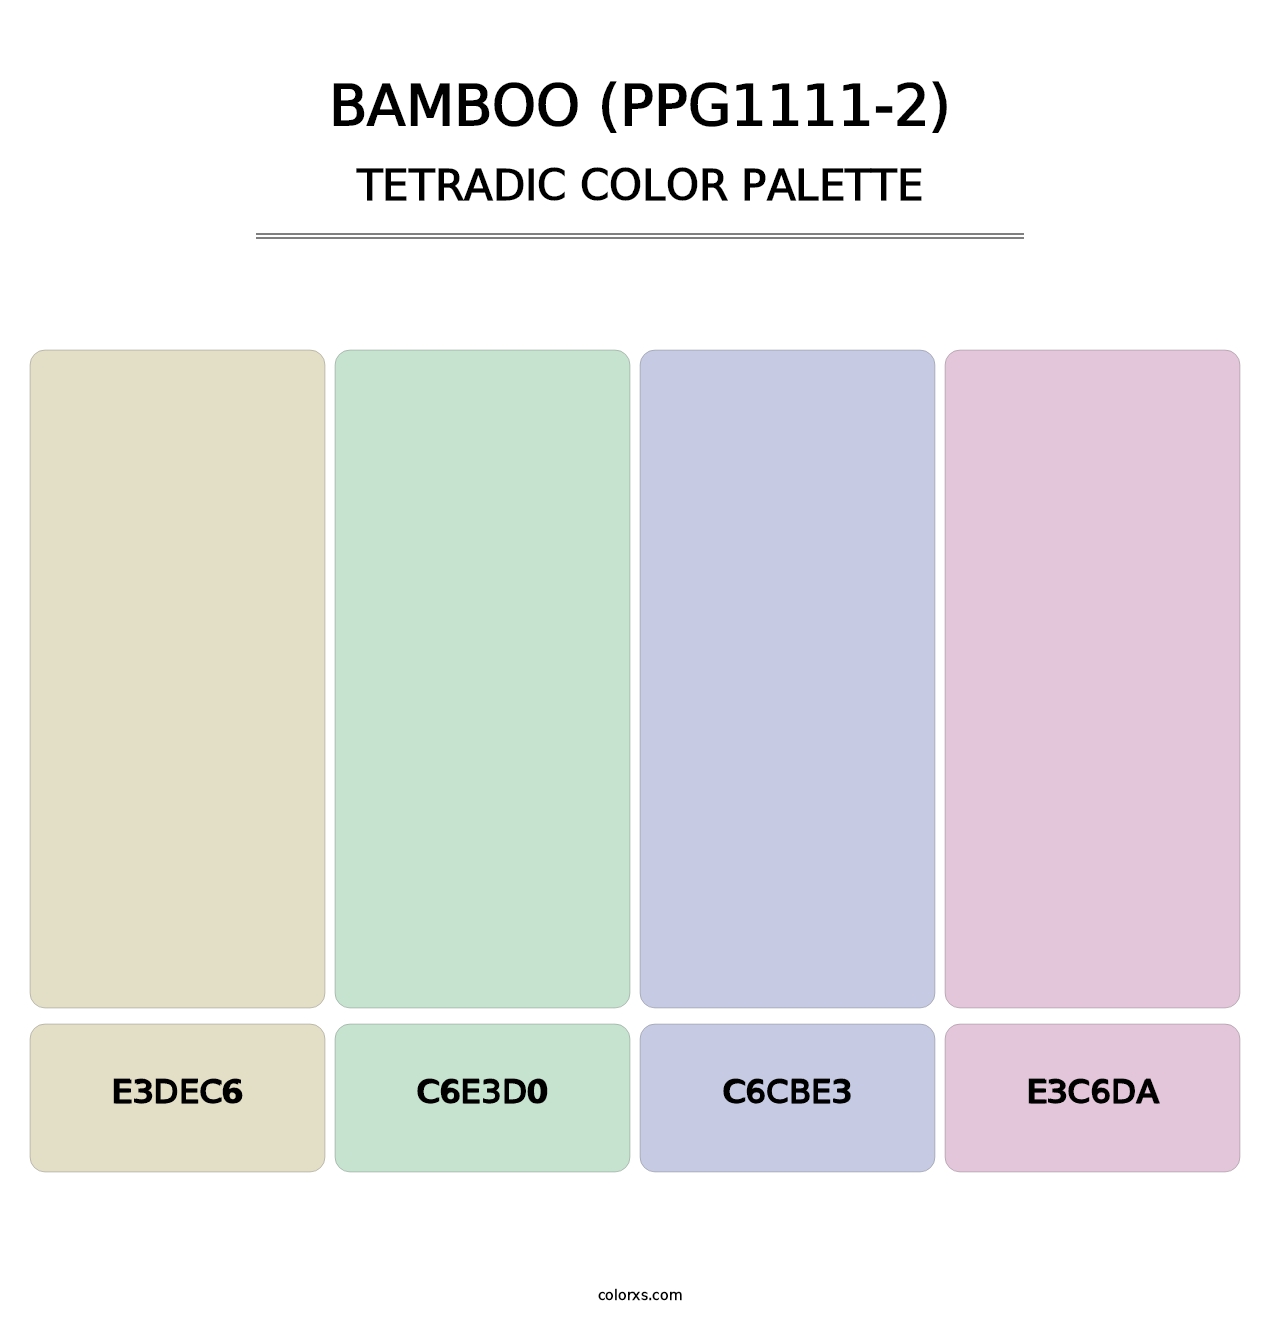 Bamboo (PPG1111-2) - Tetradic Color Palette